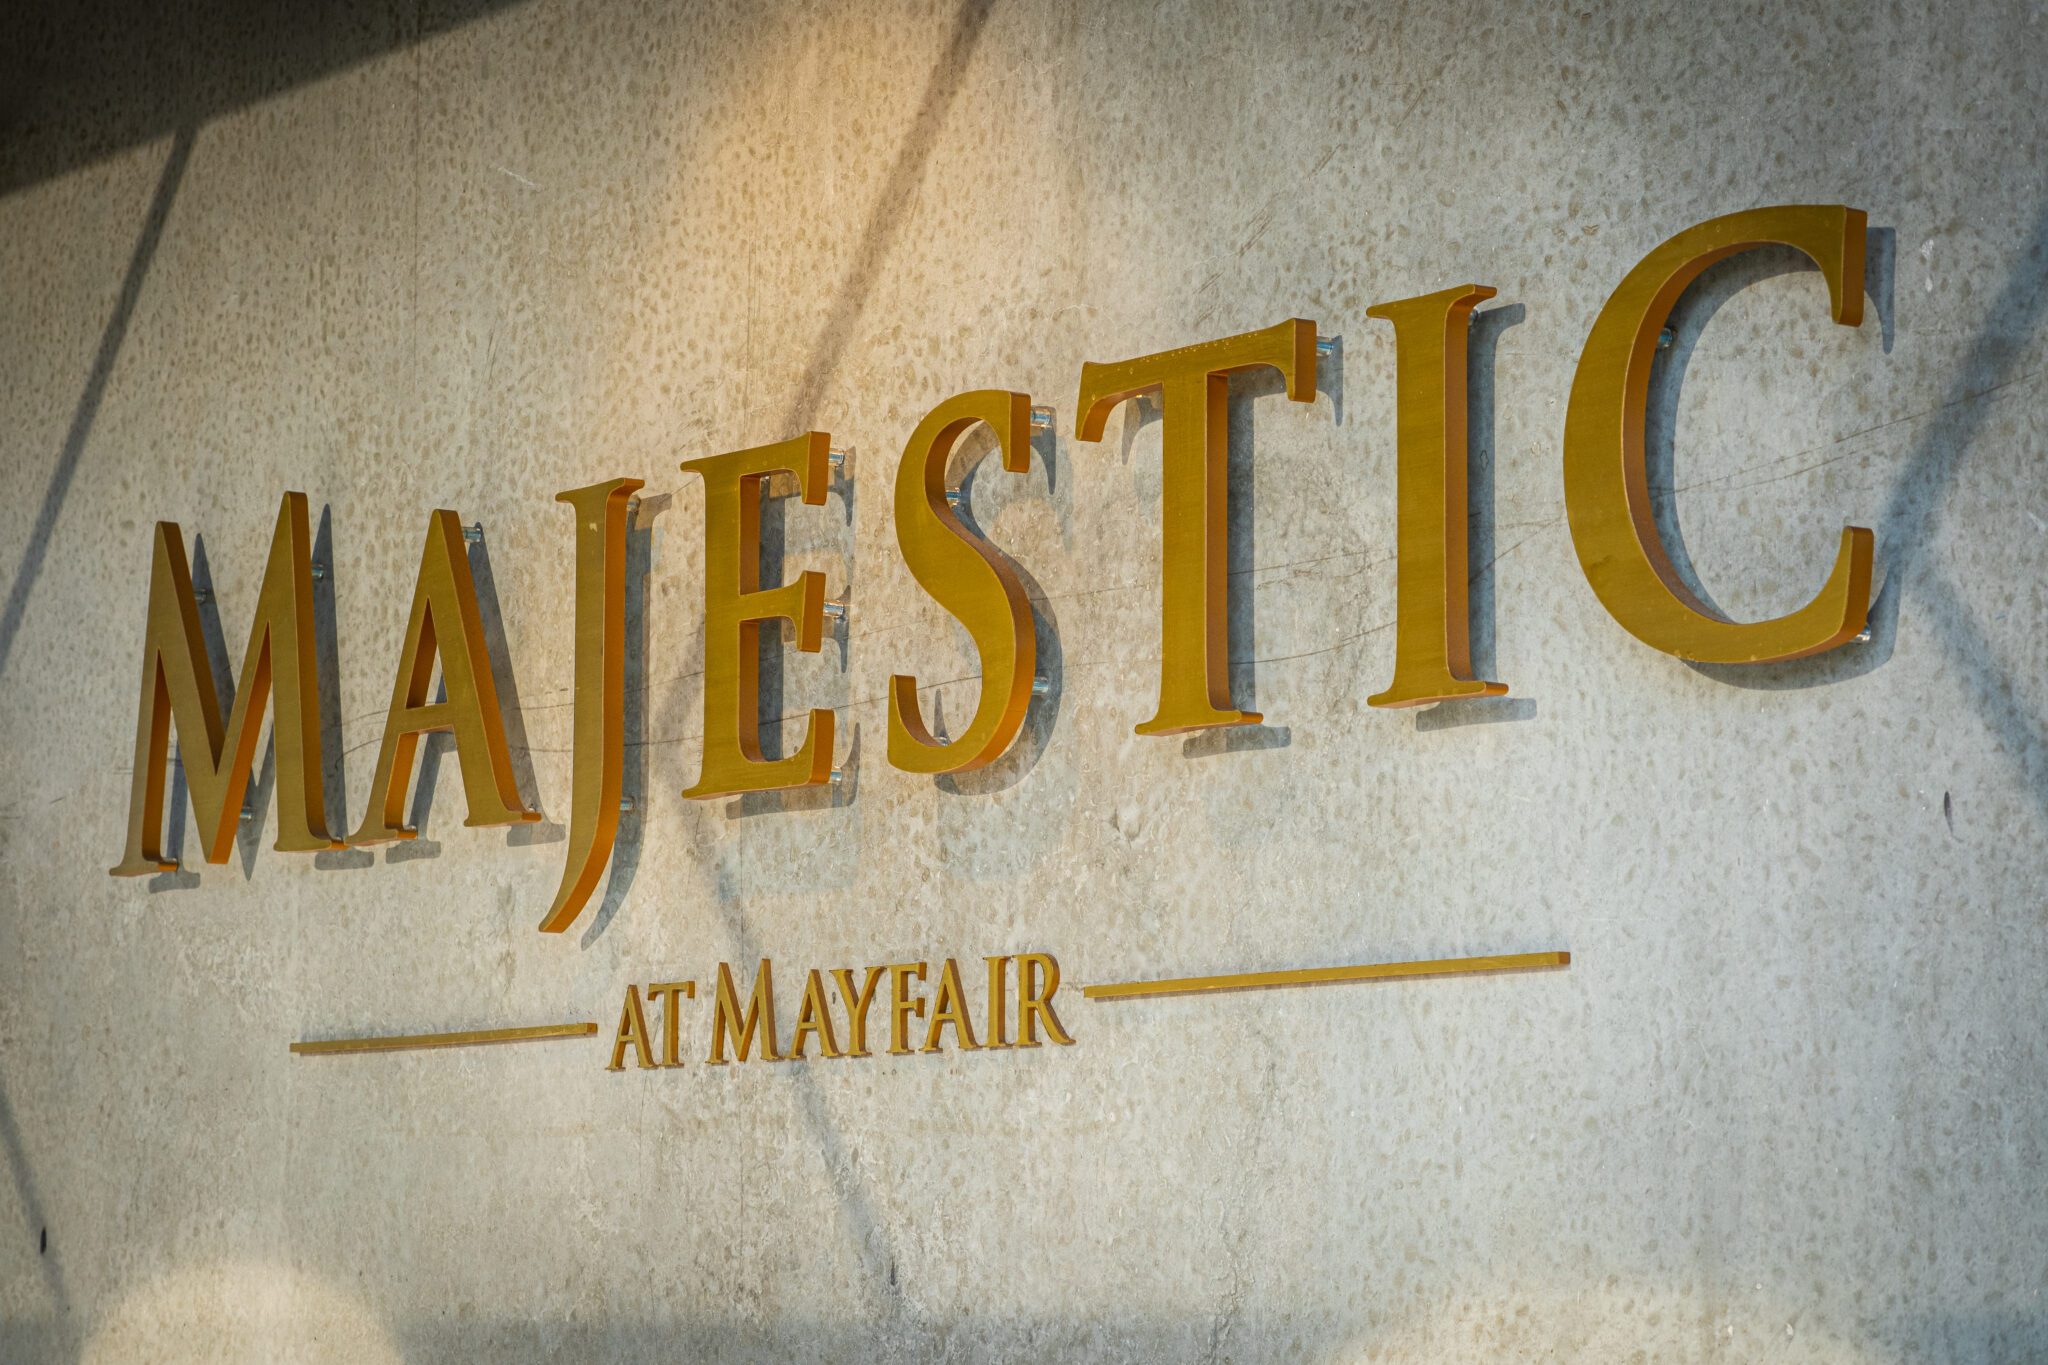 Majestic at Mayfair Sign